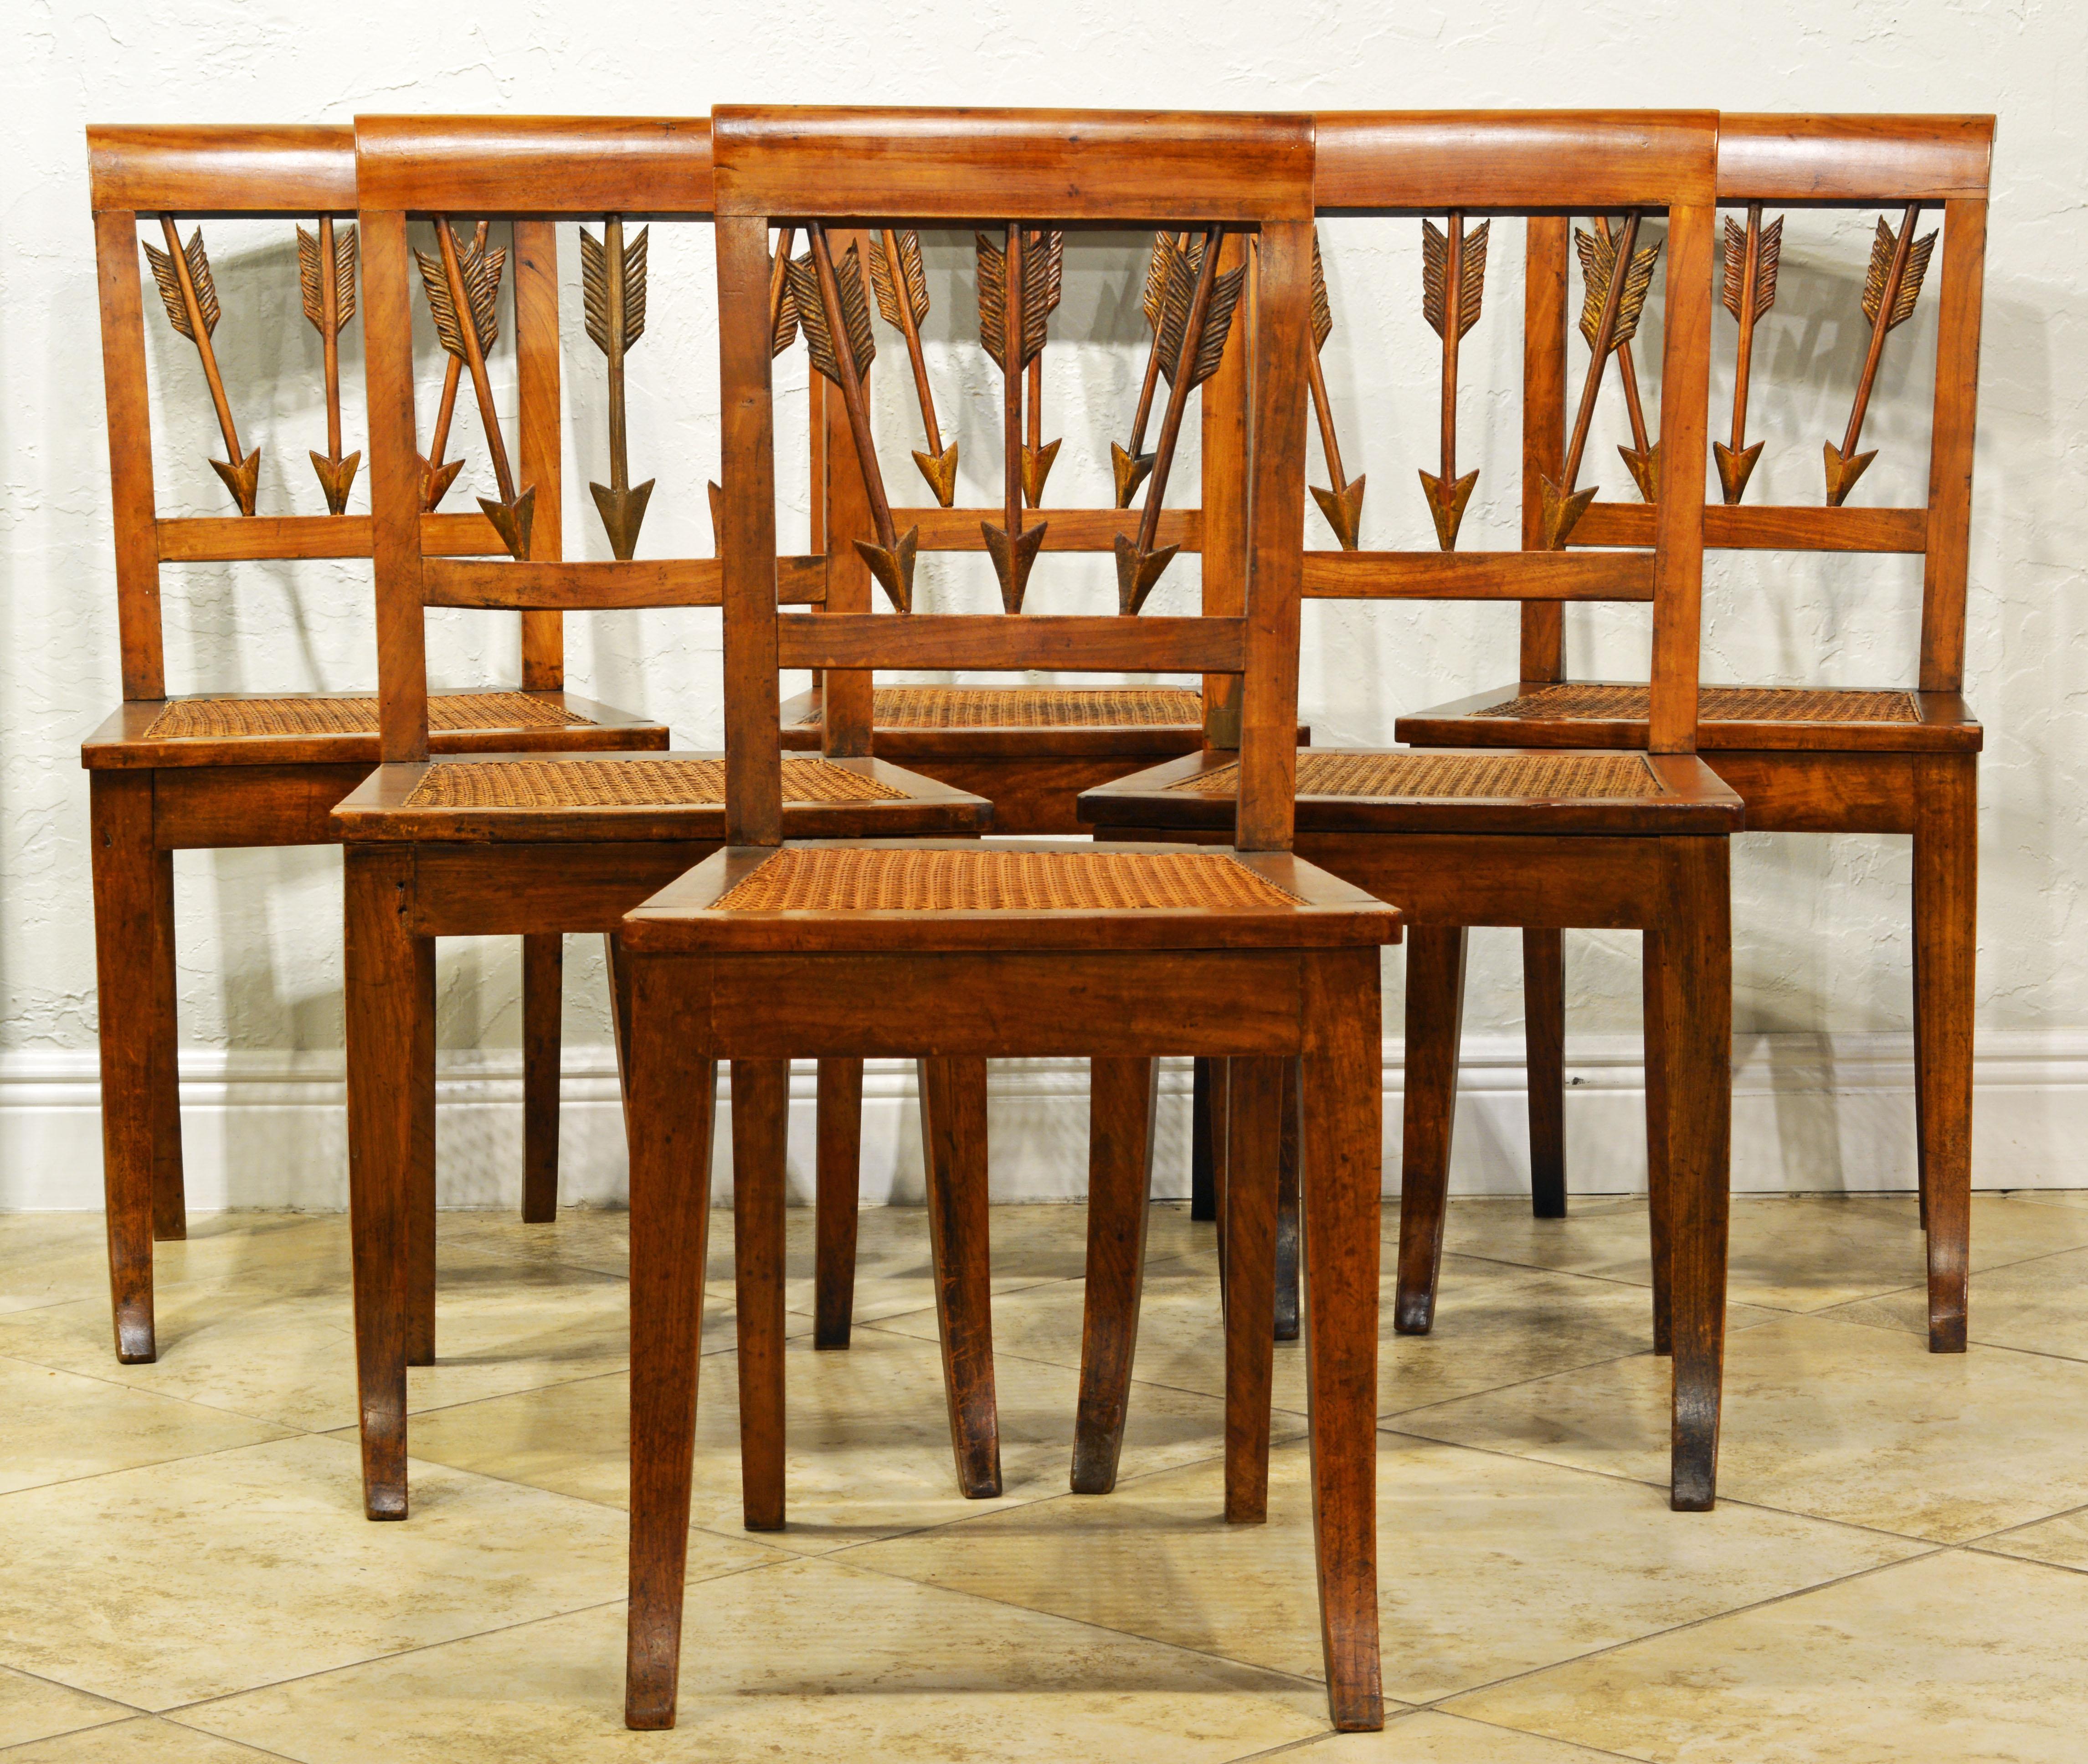 These neoclassical dining chairs are likely made in Northern Italy under influence of Austrian craftsmanship. The klismos form as well as the carved arrow shaped back splats reflect classical tradition. The wood is likely to be cherry wood. The